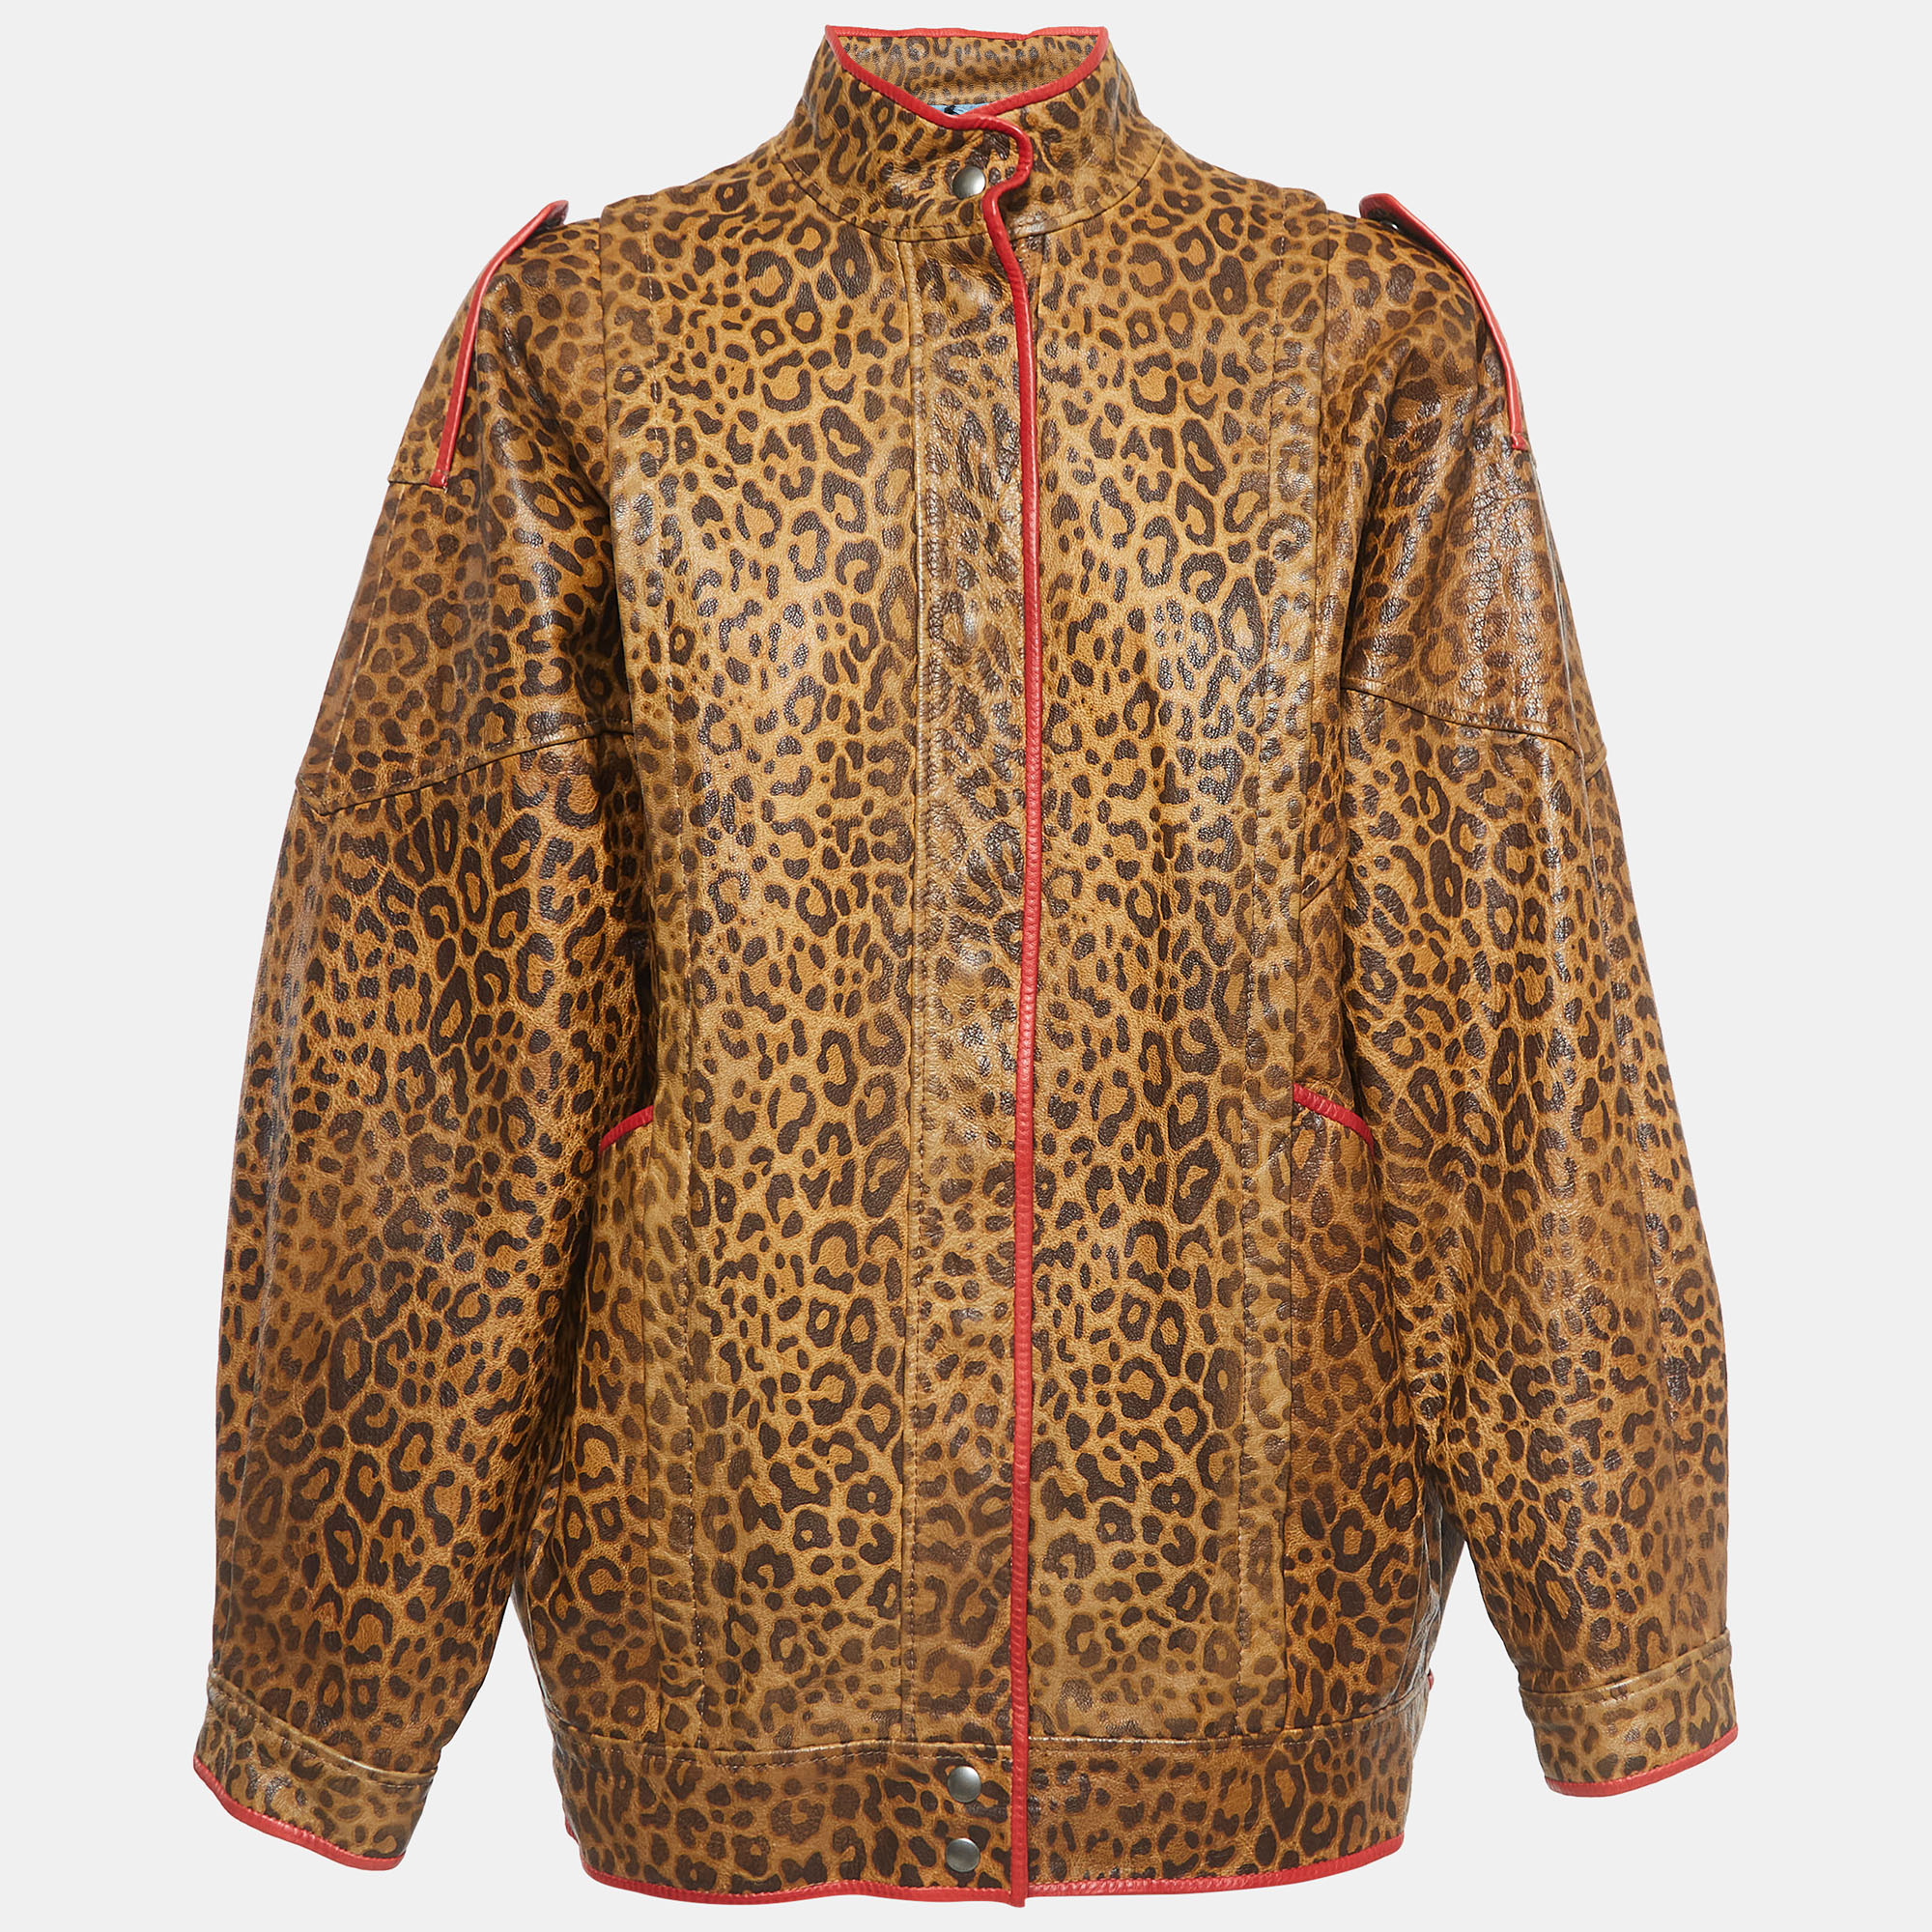 Gucci Brown Leopard Print Leather Jacket M